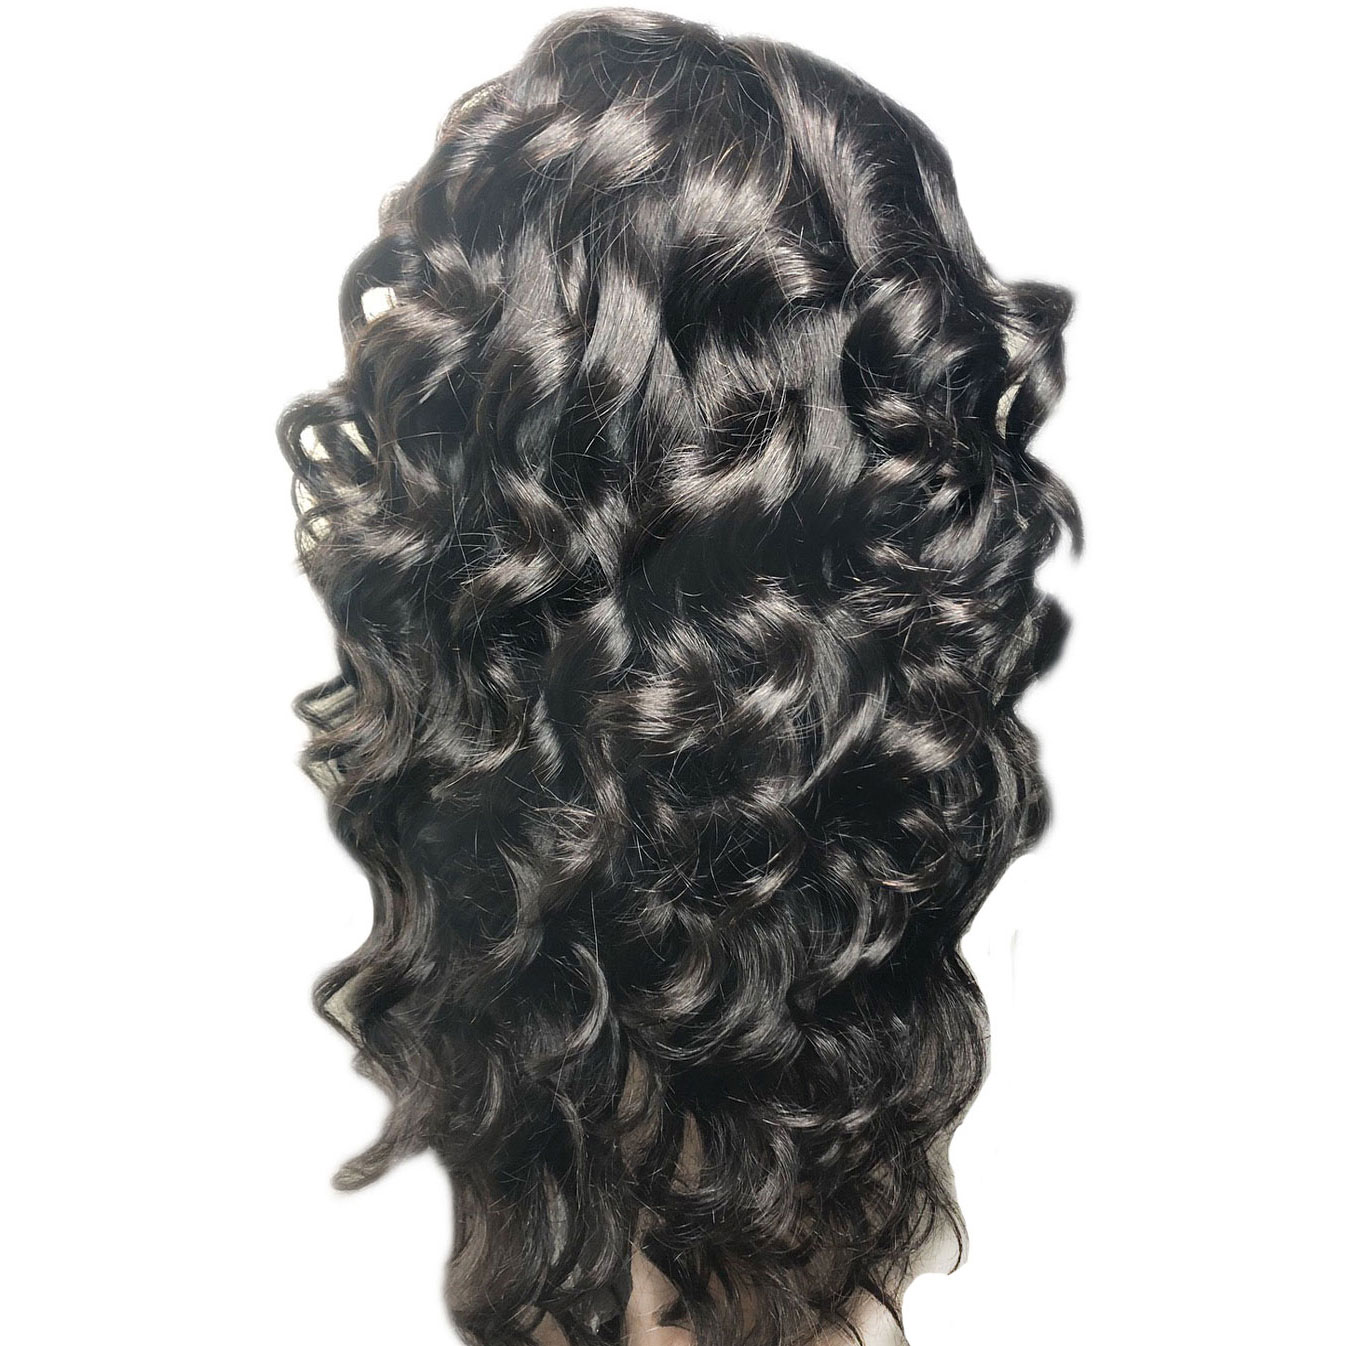 Long Big Curly Synthetic Hair Big Curly Lace Front Wig 24 Inches